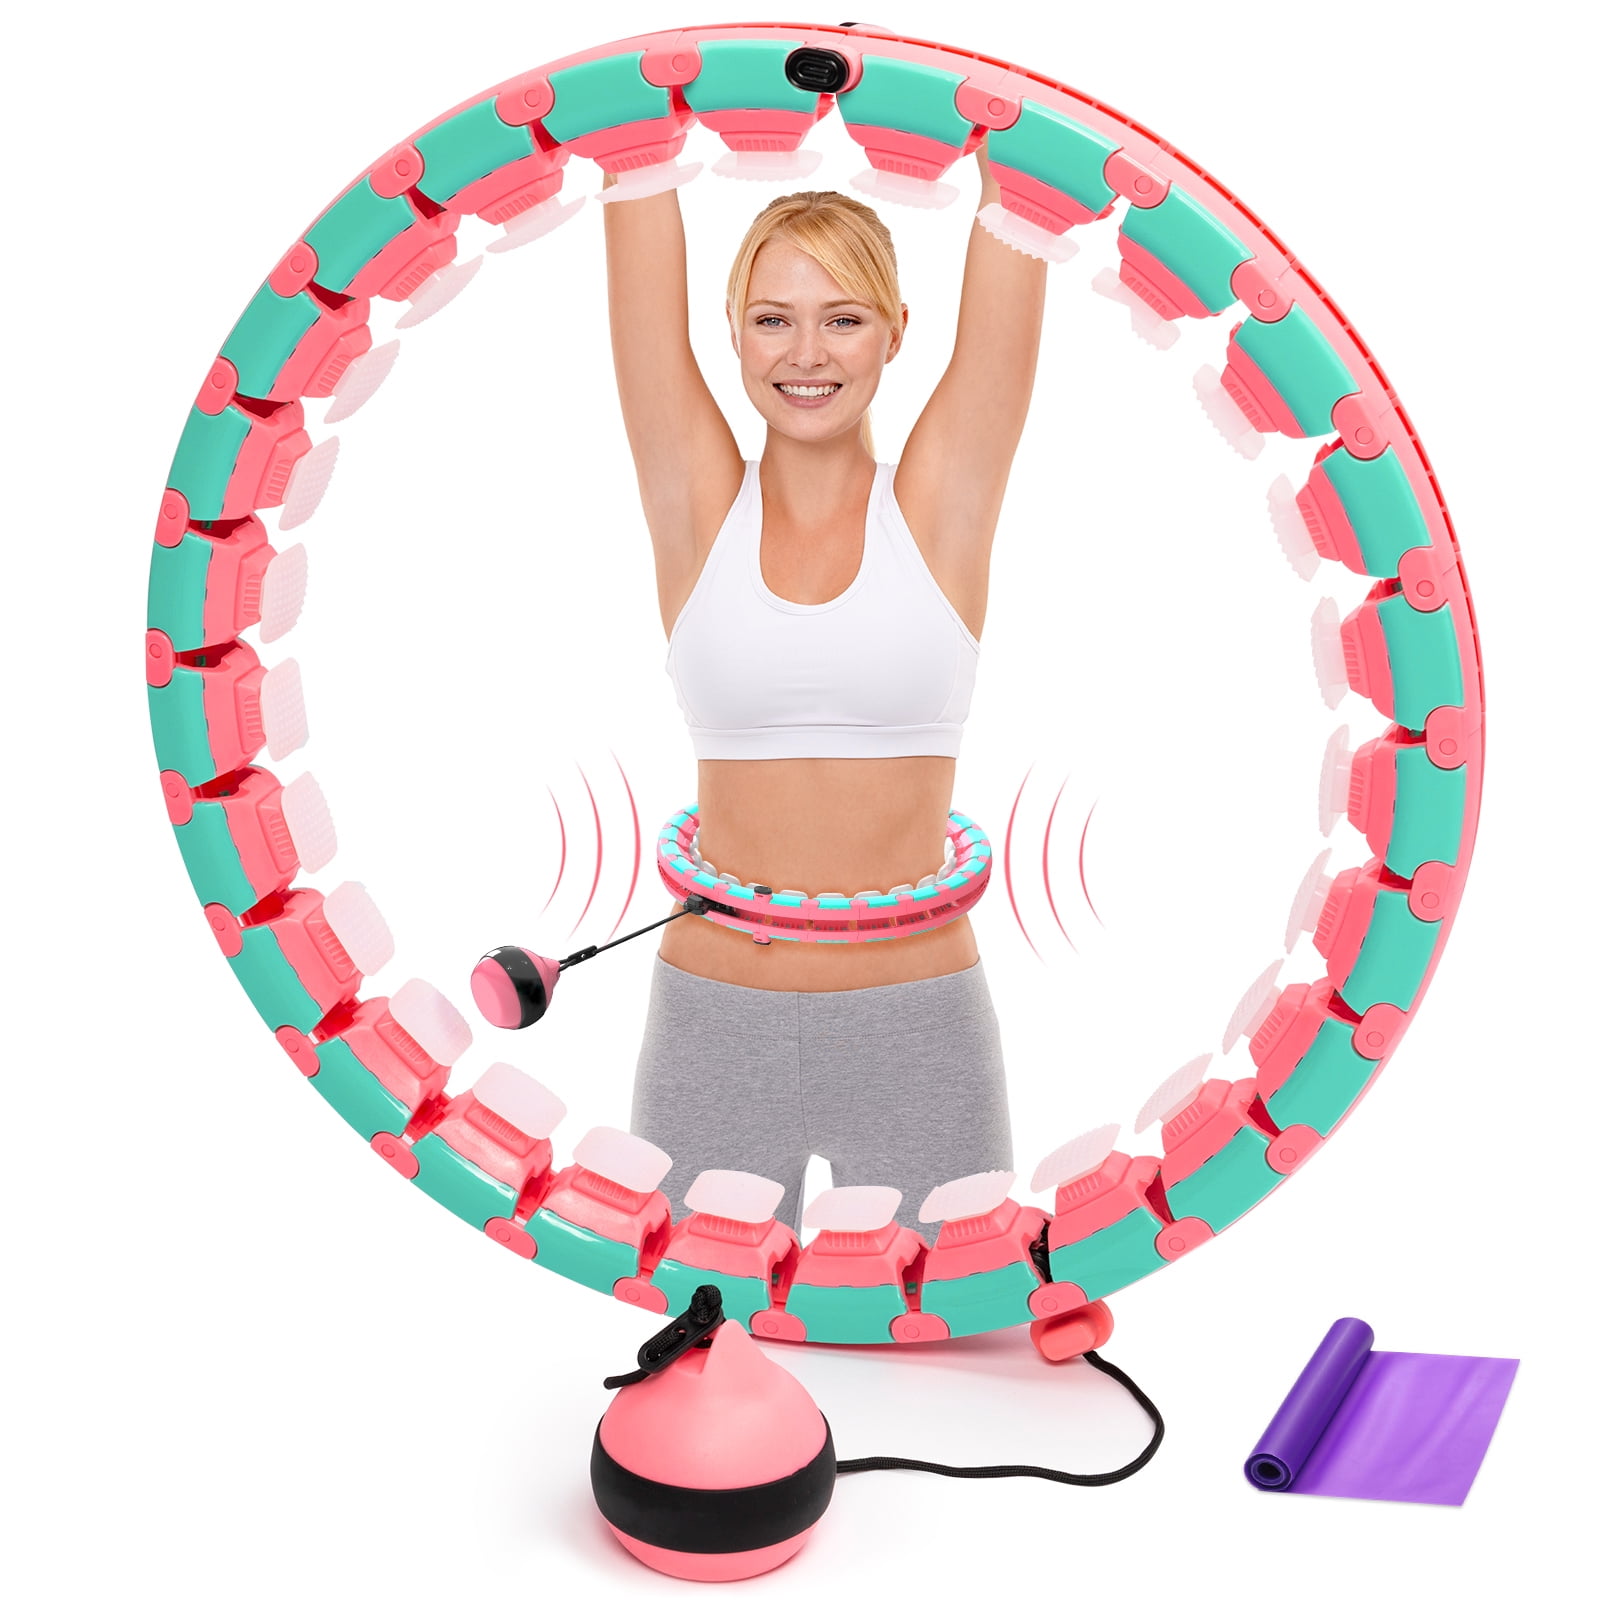 Jabykare Smart Weighted Hula Hoop Plus Size Infinity Hoola Hoop with Extra Link Adjustment for Adults Exercise Weight Loss… 